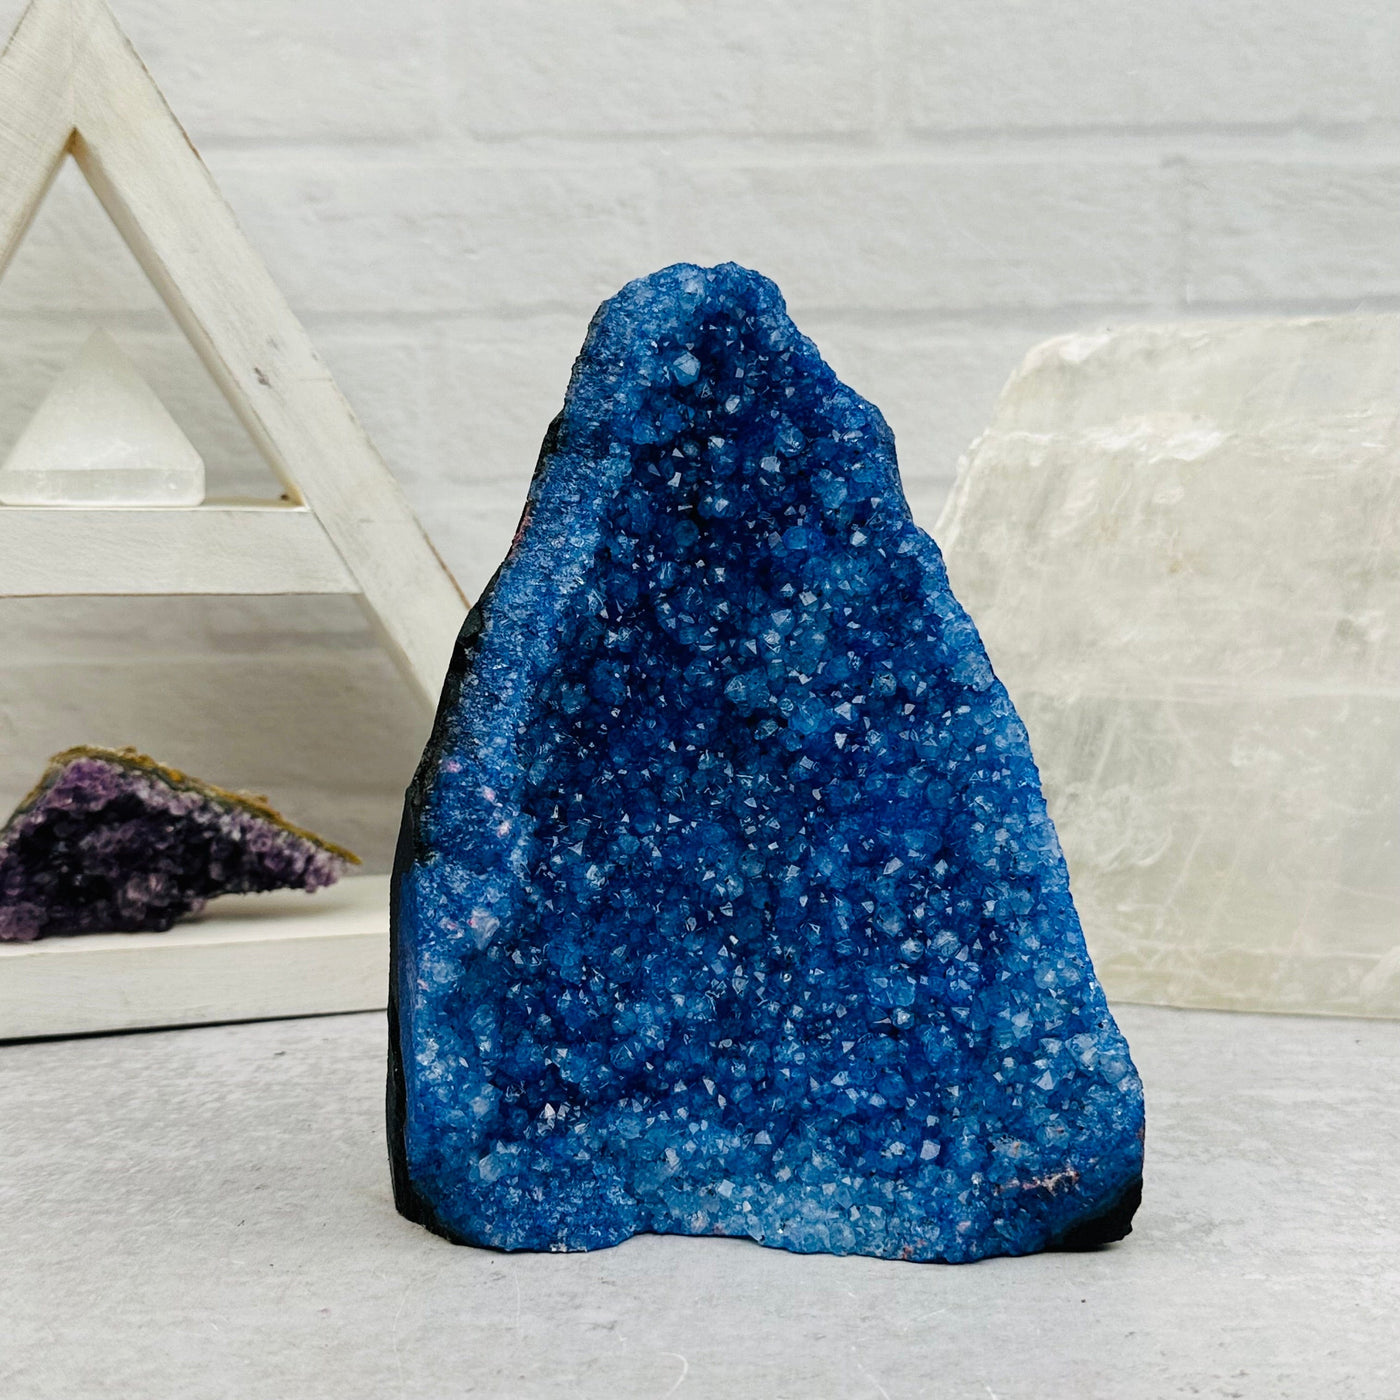 dyed blue Amethyst Crystal Cluster CutBase displayed as home decor 